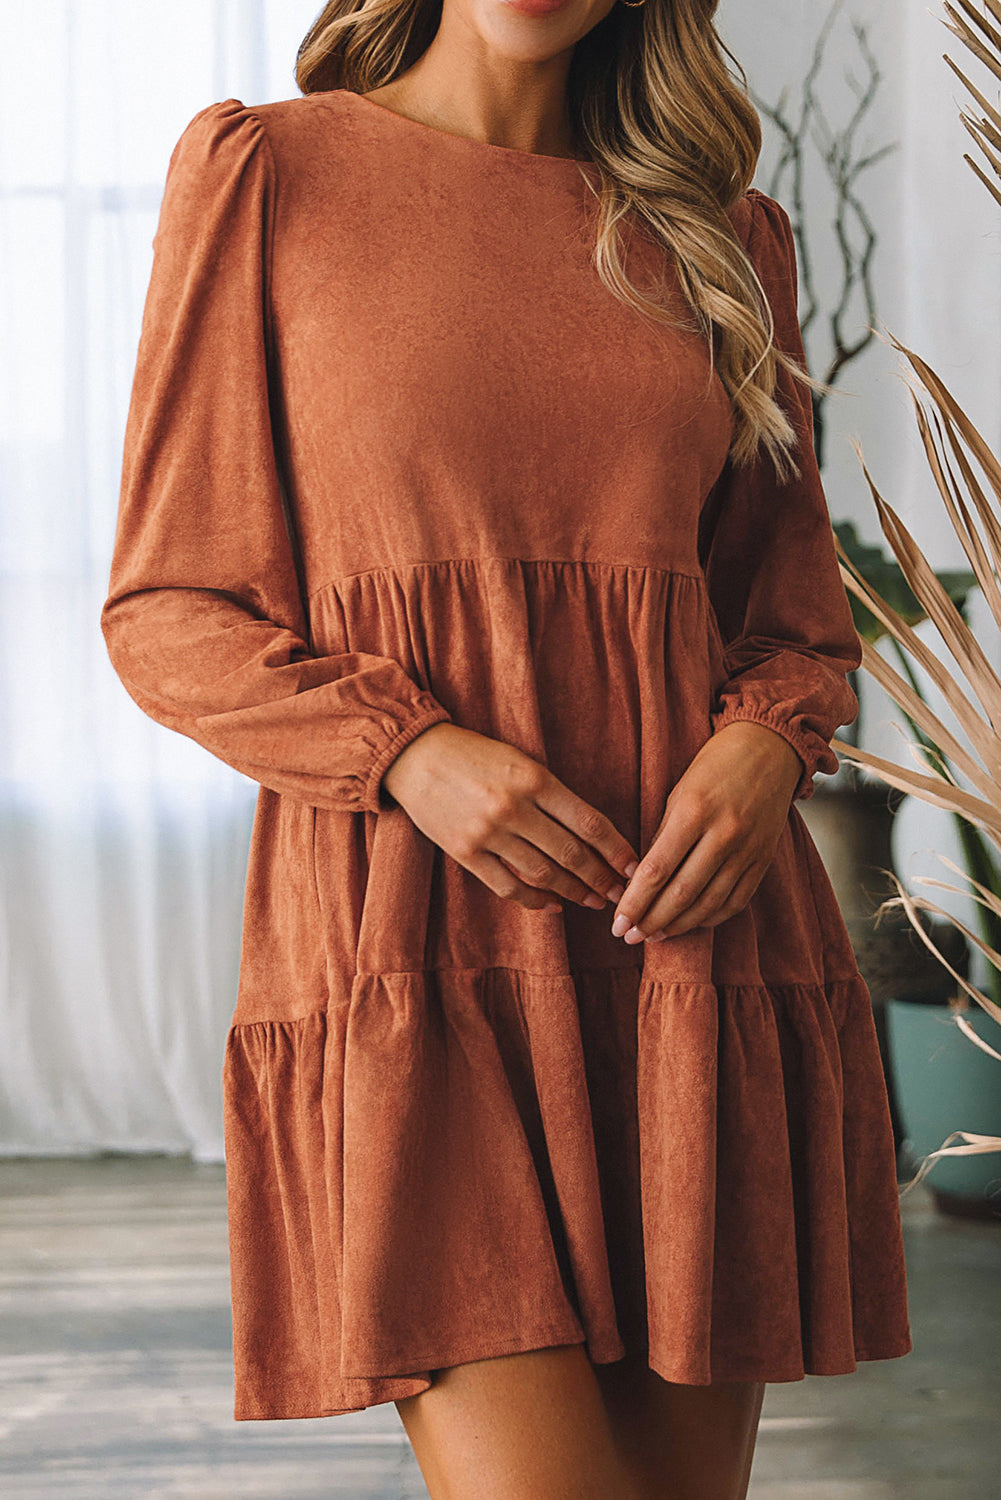 Chestnut Faux Suede Tiered Babydoll Dress